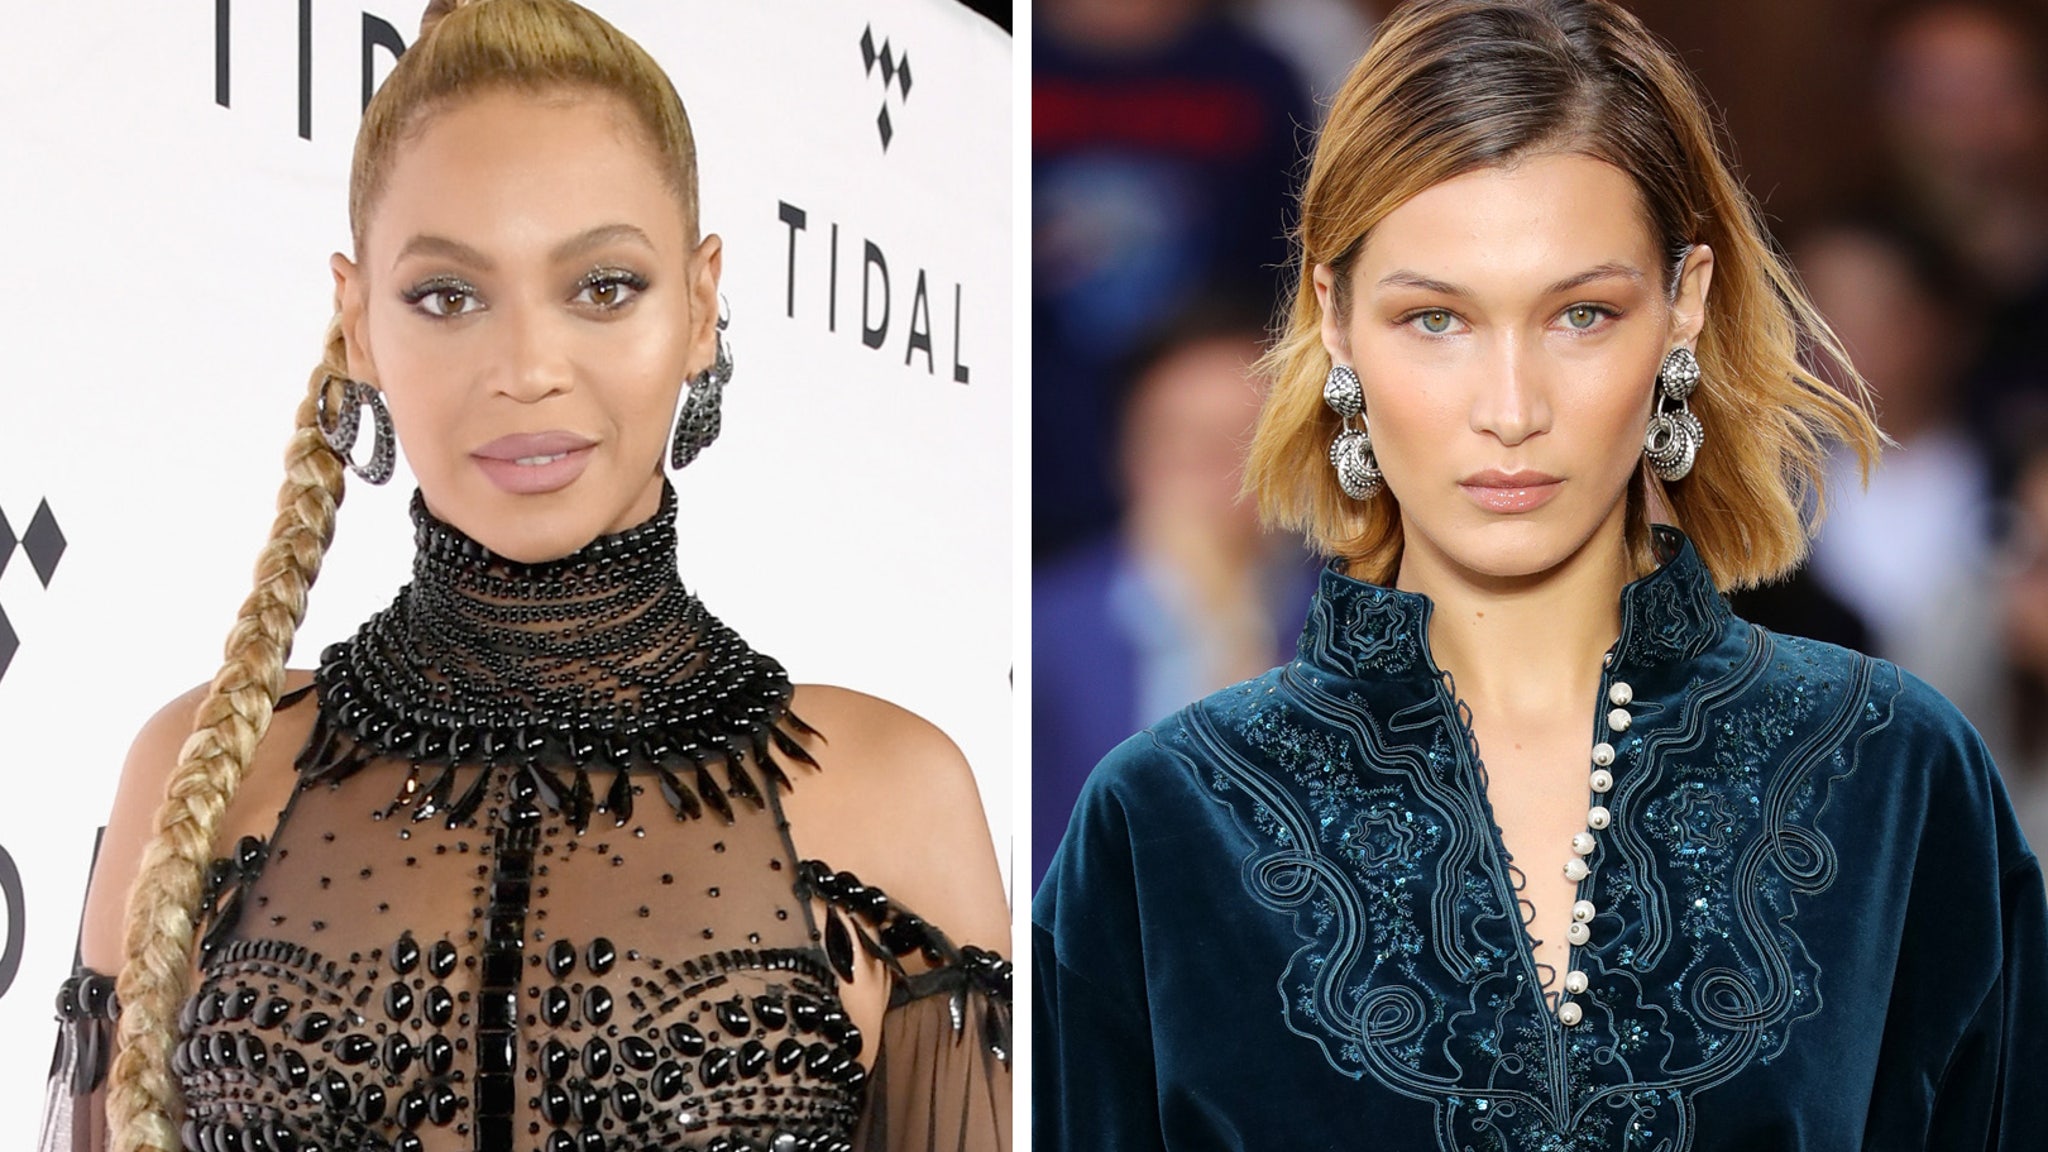 Beyonce Loses to Bella Hadid as Most Beautiful Woman - Twitter Calls Racism